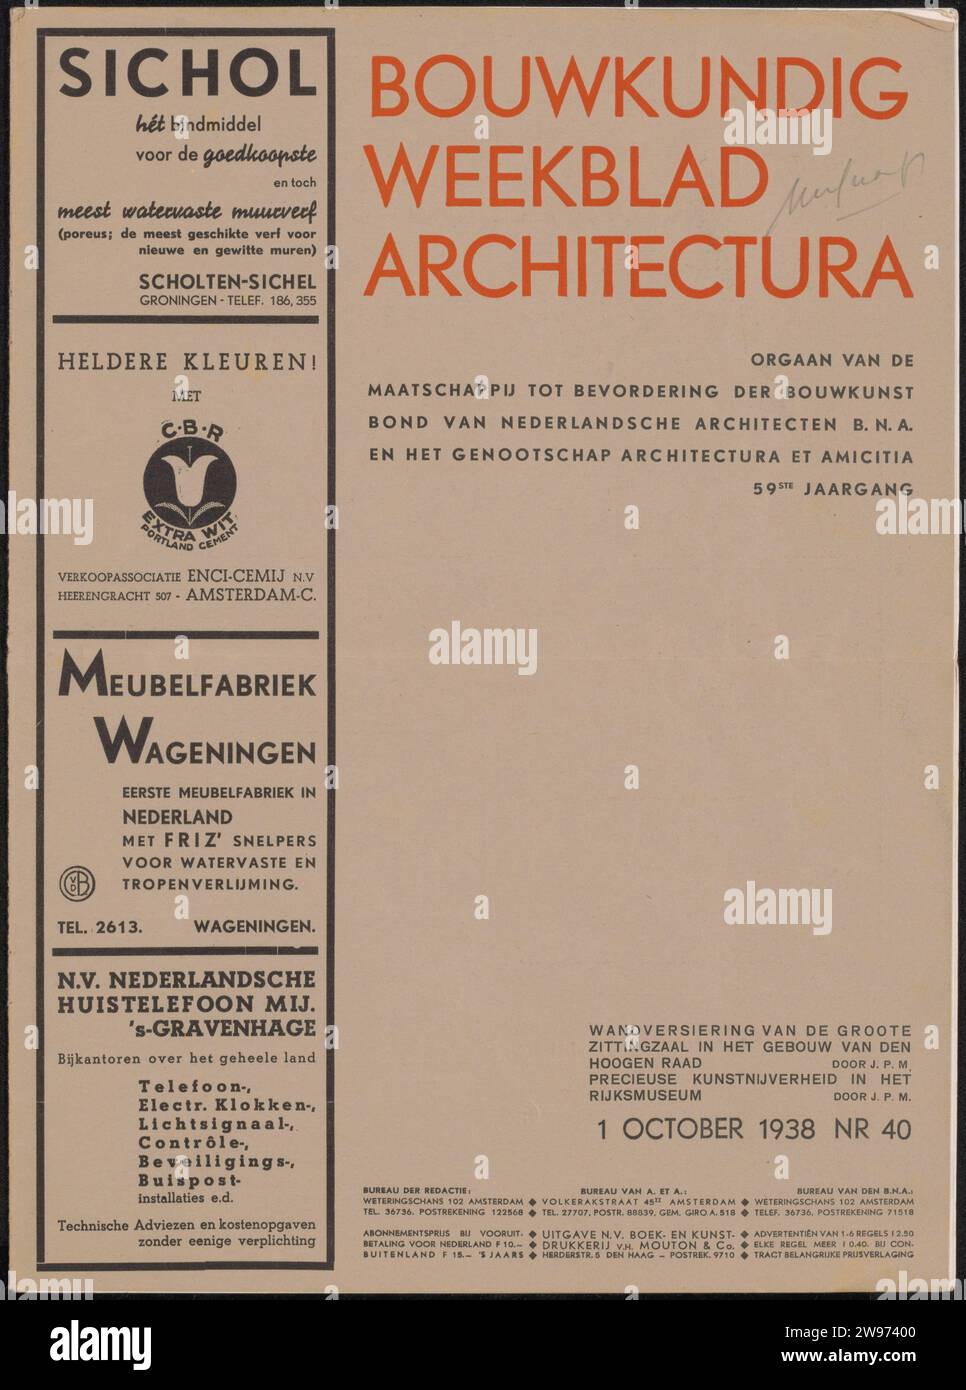 Architectural Weekly Architectura, Mouton & Co., 1938 magazine  The Hague paper printing Stock Photo